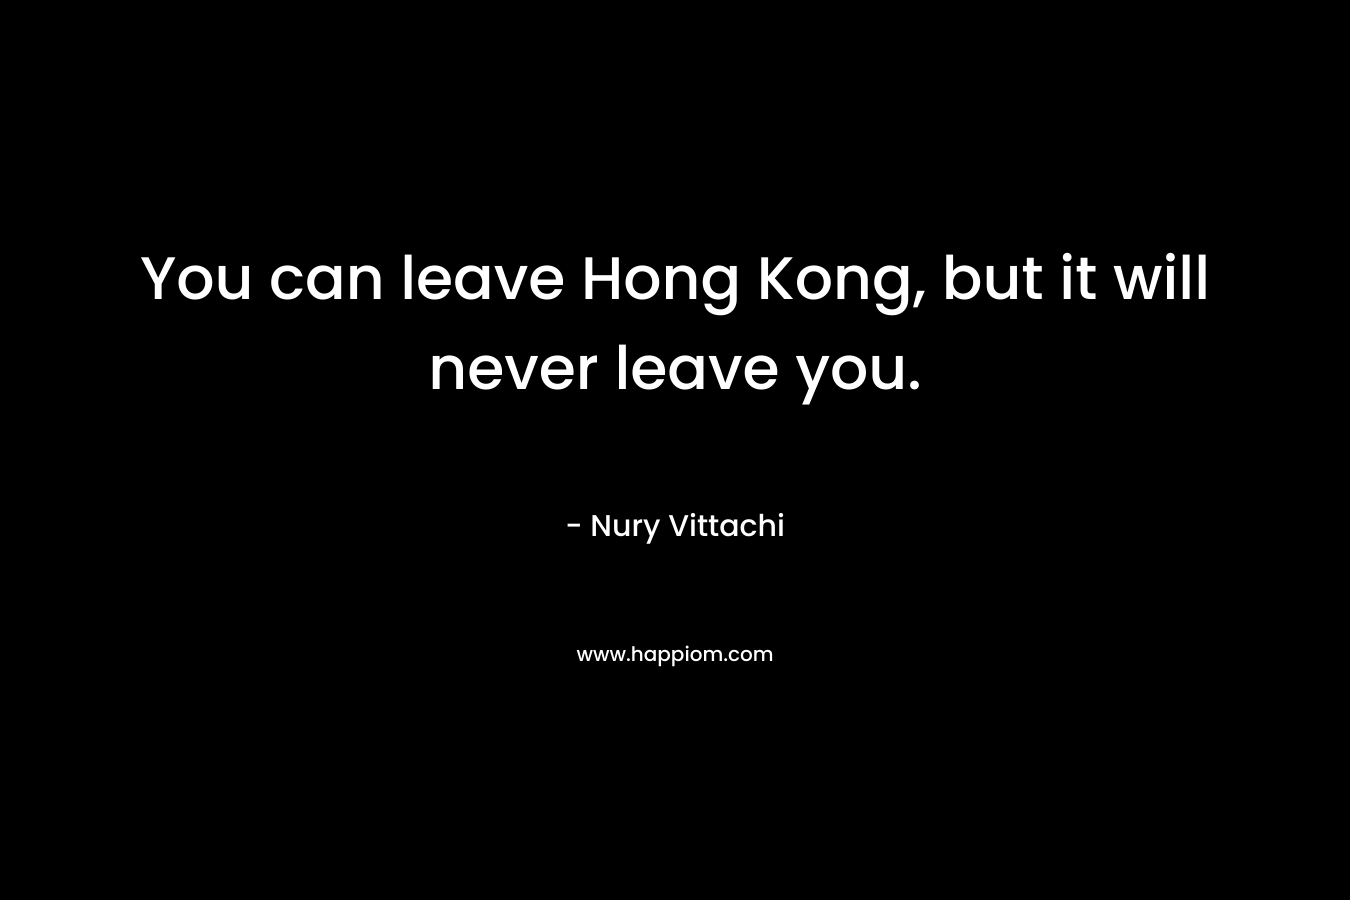 You can leave Hong Kong, but it will never leave you.